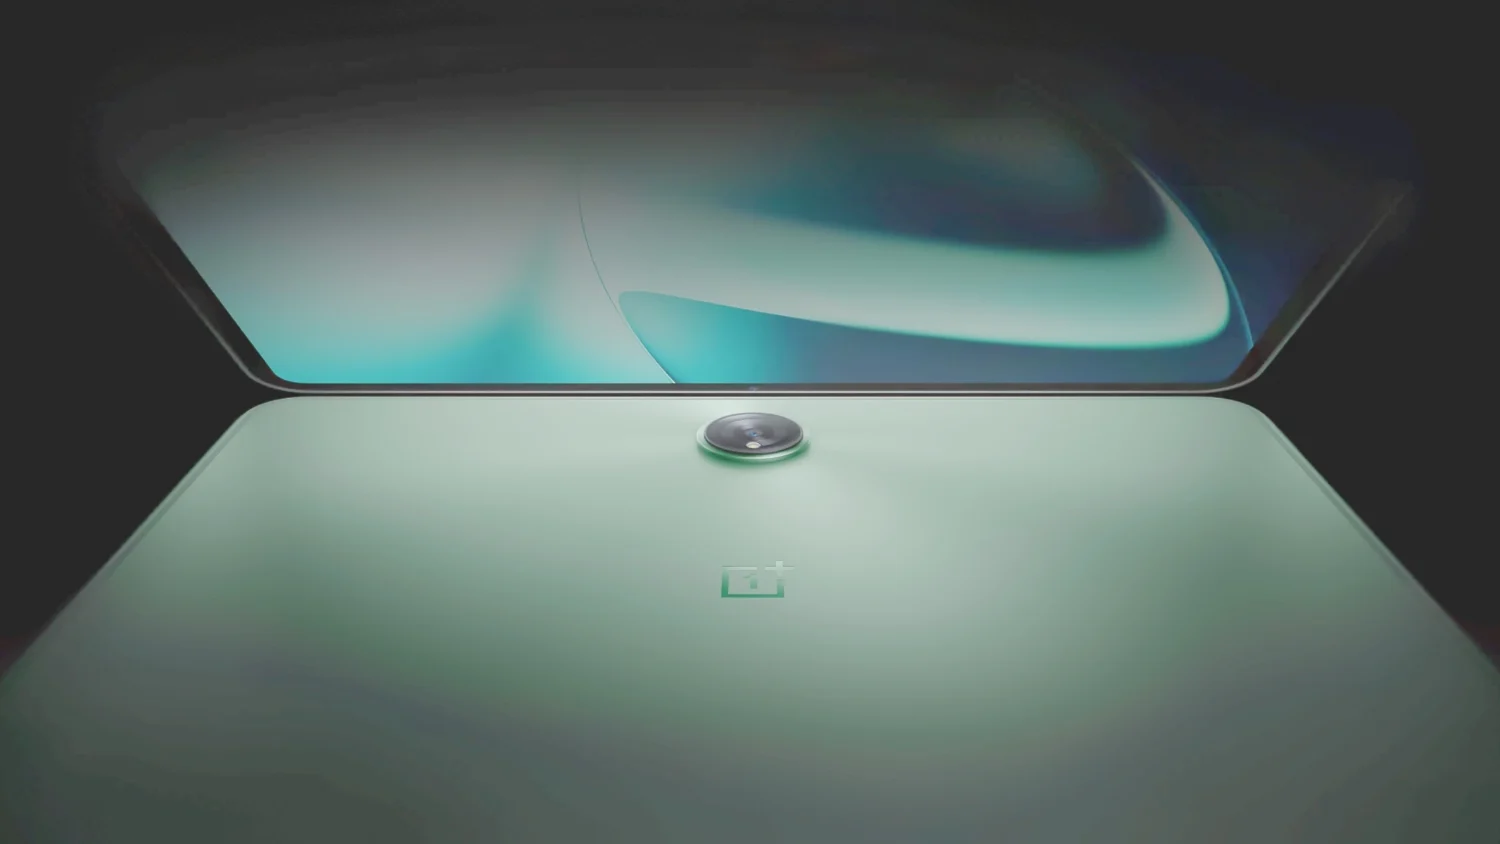 An image edited with increased shadow levels on the OnePlus Pad, showing the screen with narrow bezels floating on the back of the device.